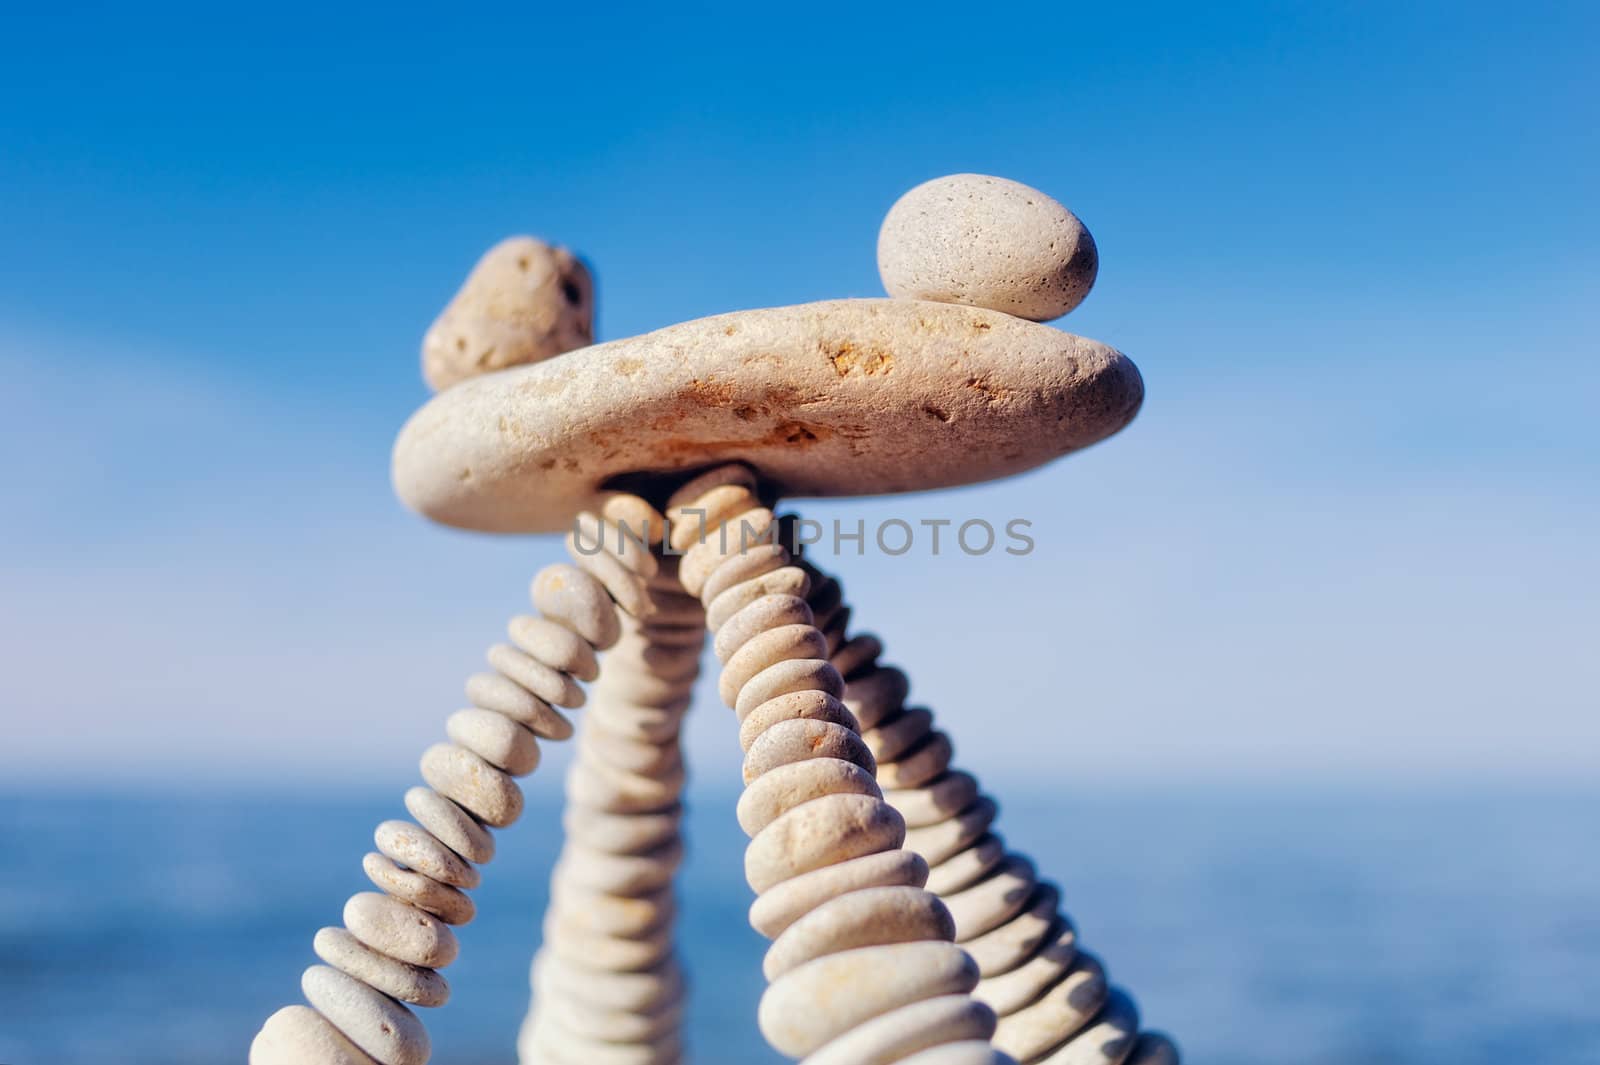 Balancing of white stones on the top of pyramidal stack